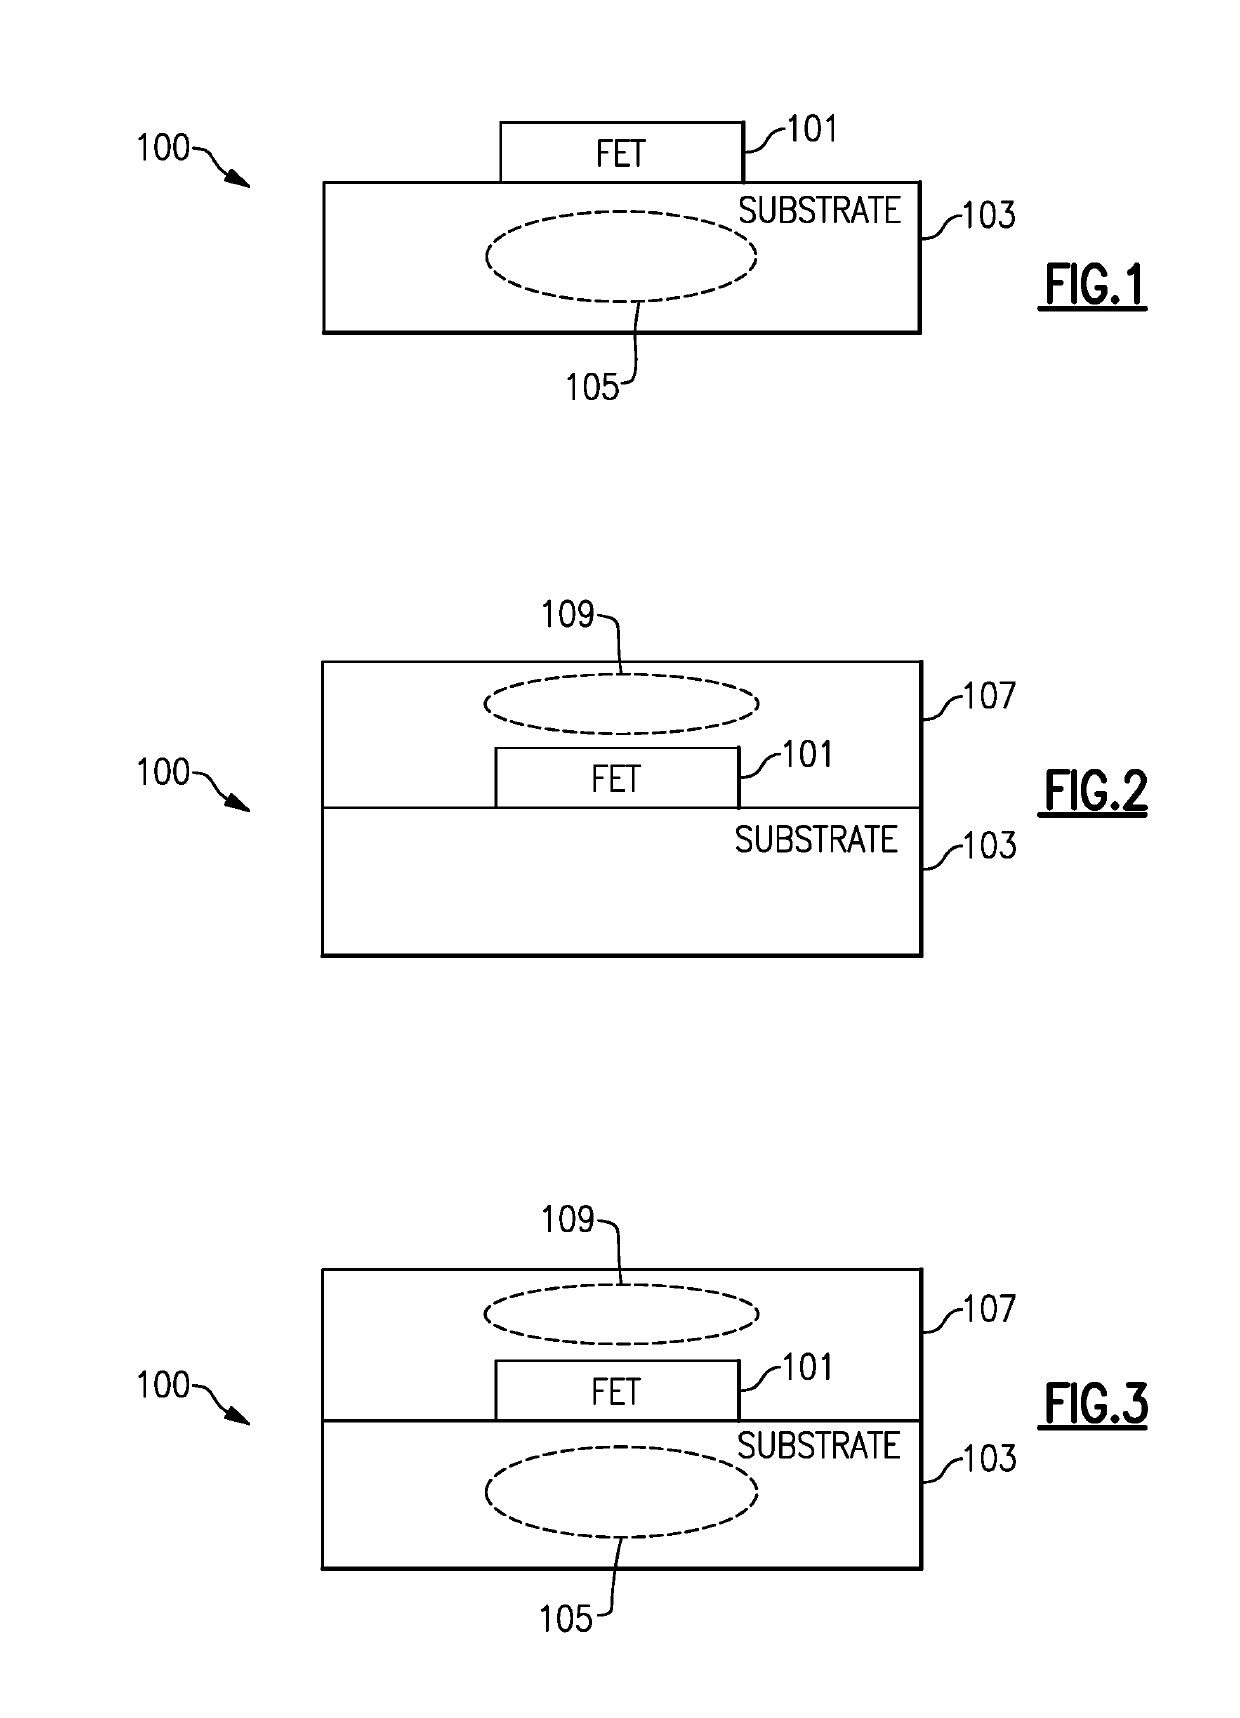 Transistor finger spacing and dimension variation in electronic devices